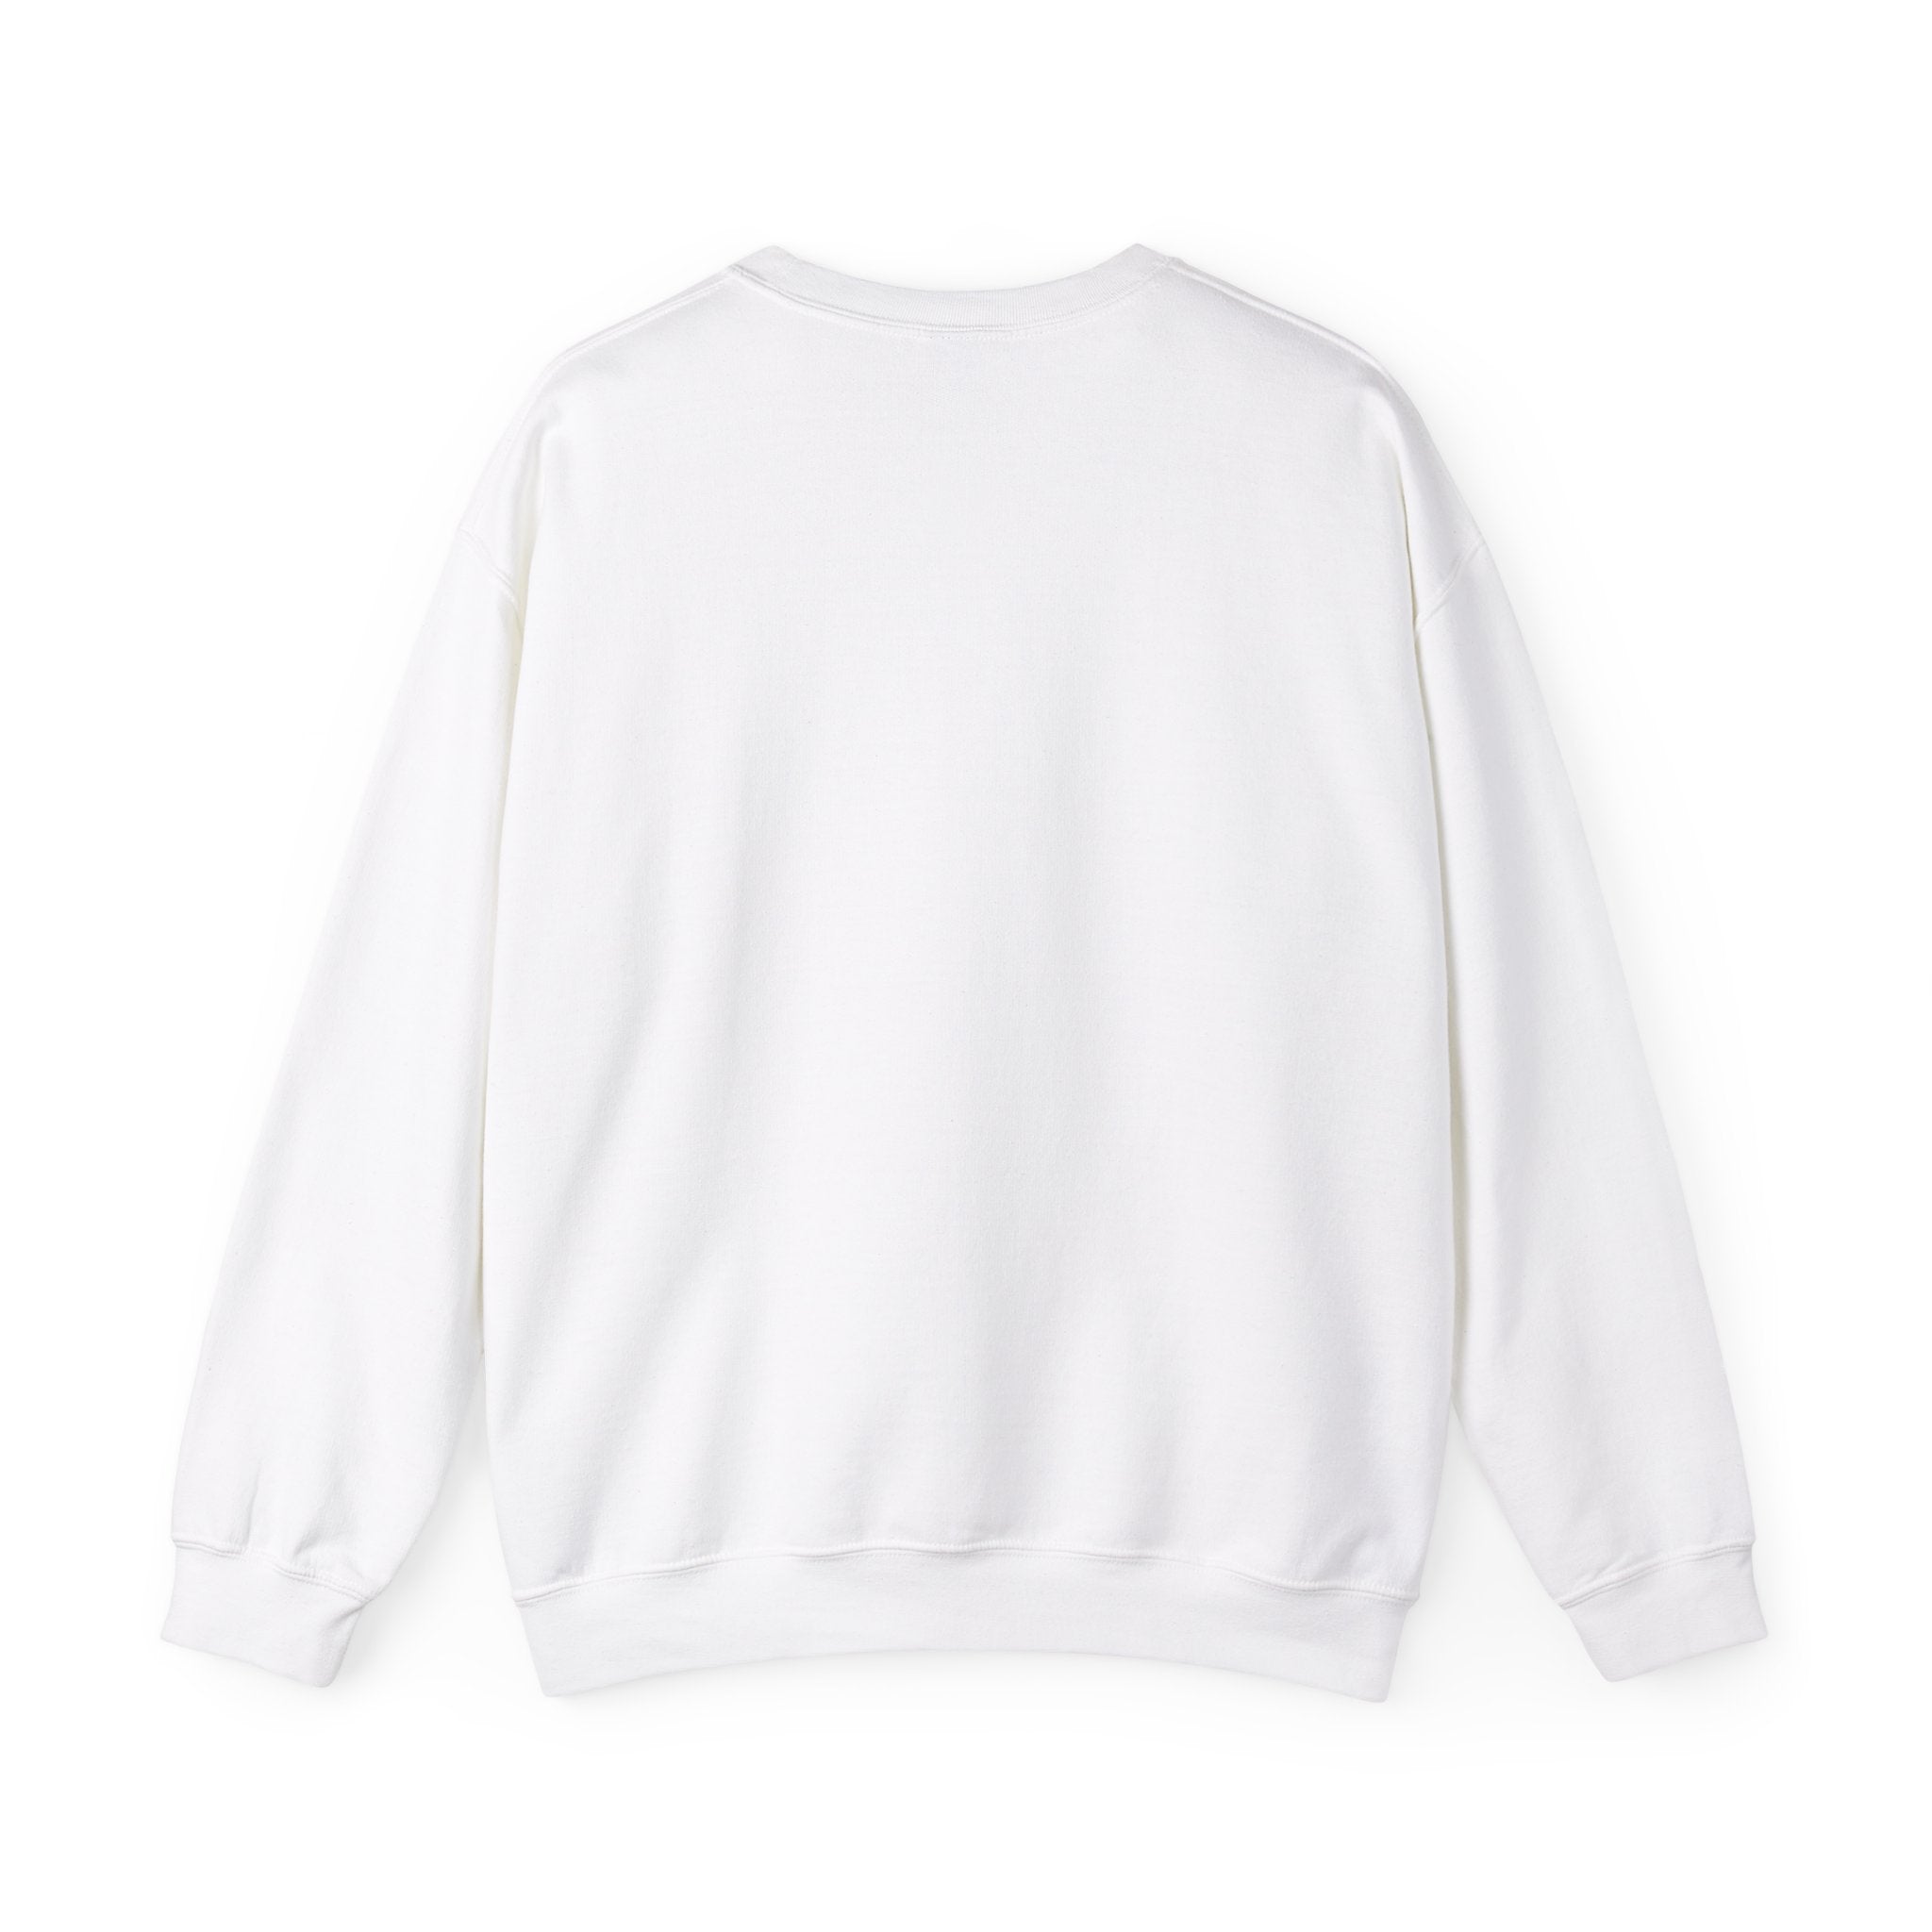 A plain white LA-TI-NA - Sweatshirt with long sleeves and a crew neck, seen from the back—this cozy winter essential is perfect for cooler days.